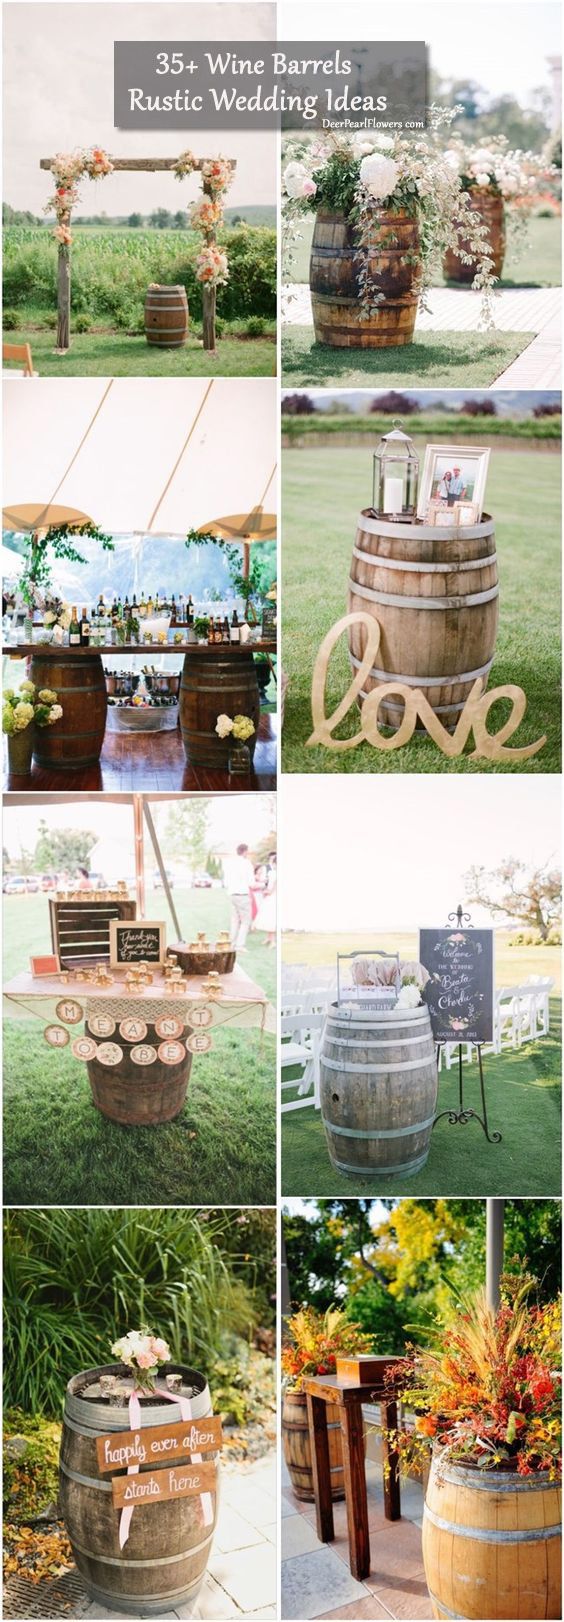 Rustic Country Wedding Ideas to Use Wine Barrels